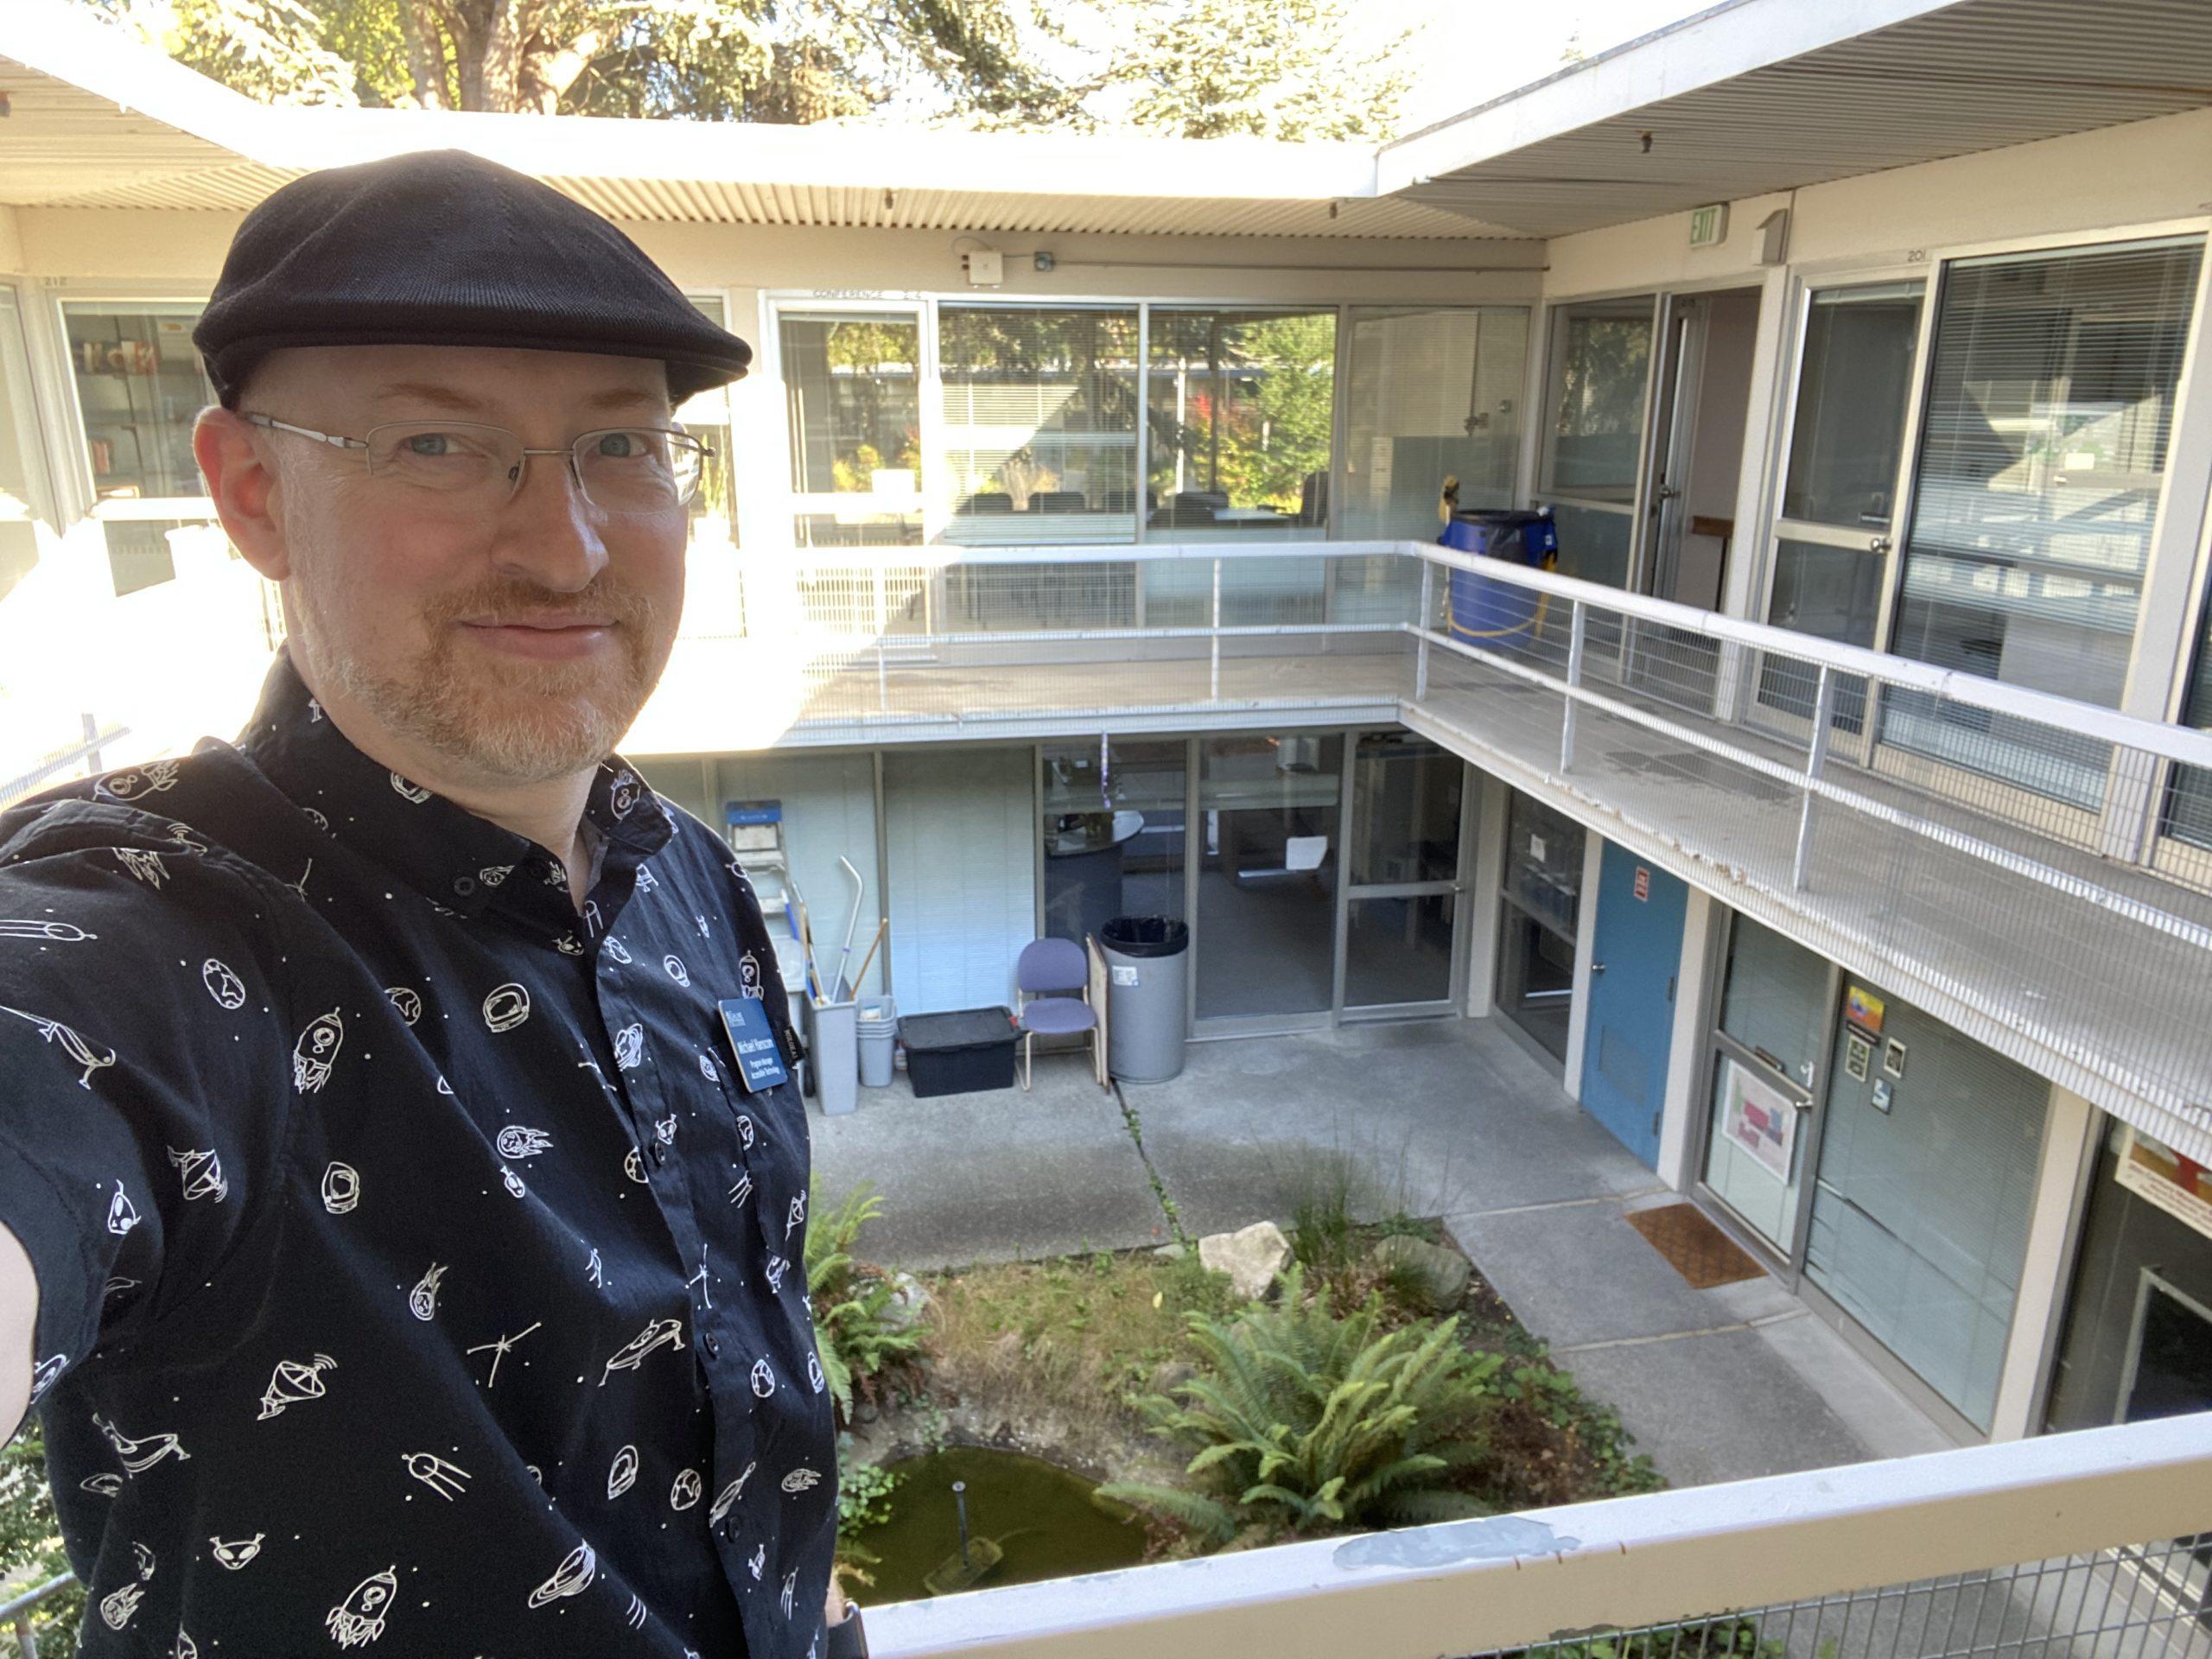 Me standing on a second-floor walkway in a small square building with a courtyard in the center. In the courtyard is a small pond surrounded by plants. The sun is shining through the open roof.